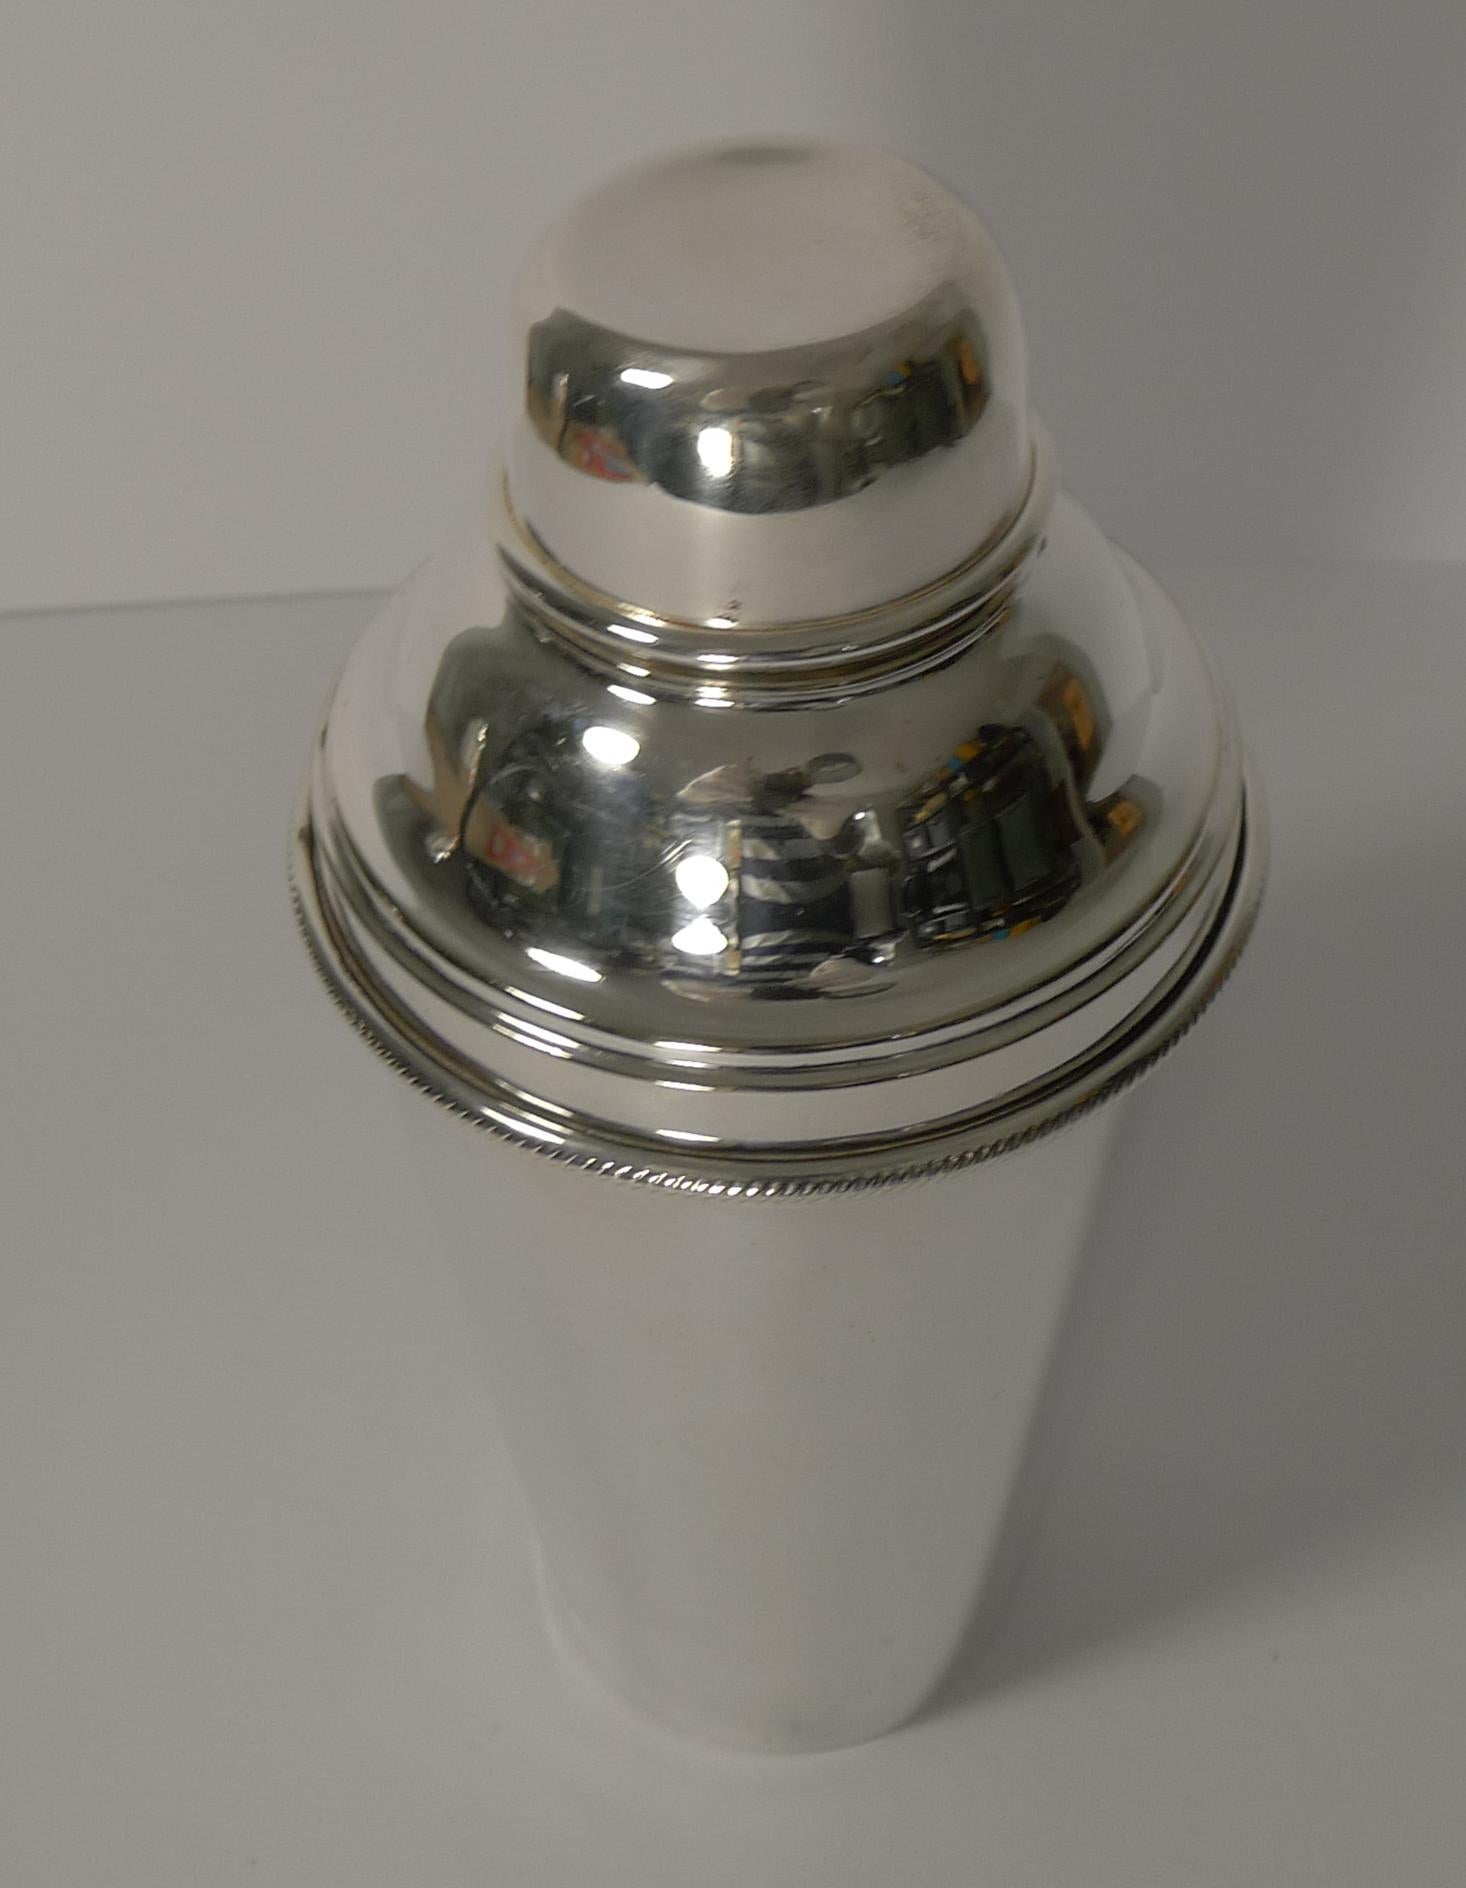 Art Deco English Silver Plated Cocktail Shaker with Lemon Squeezer, circa 1930